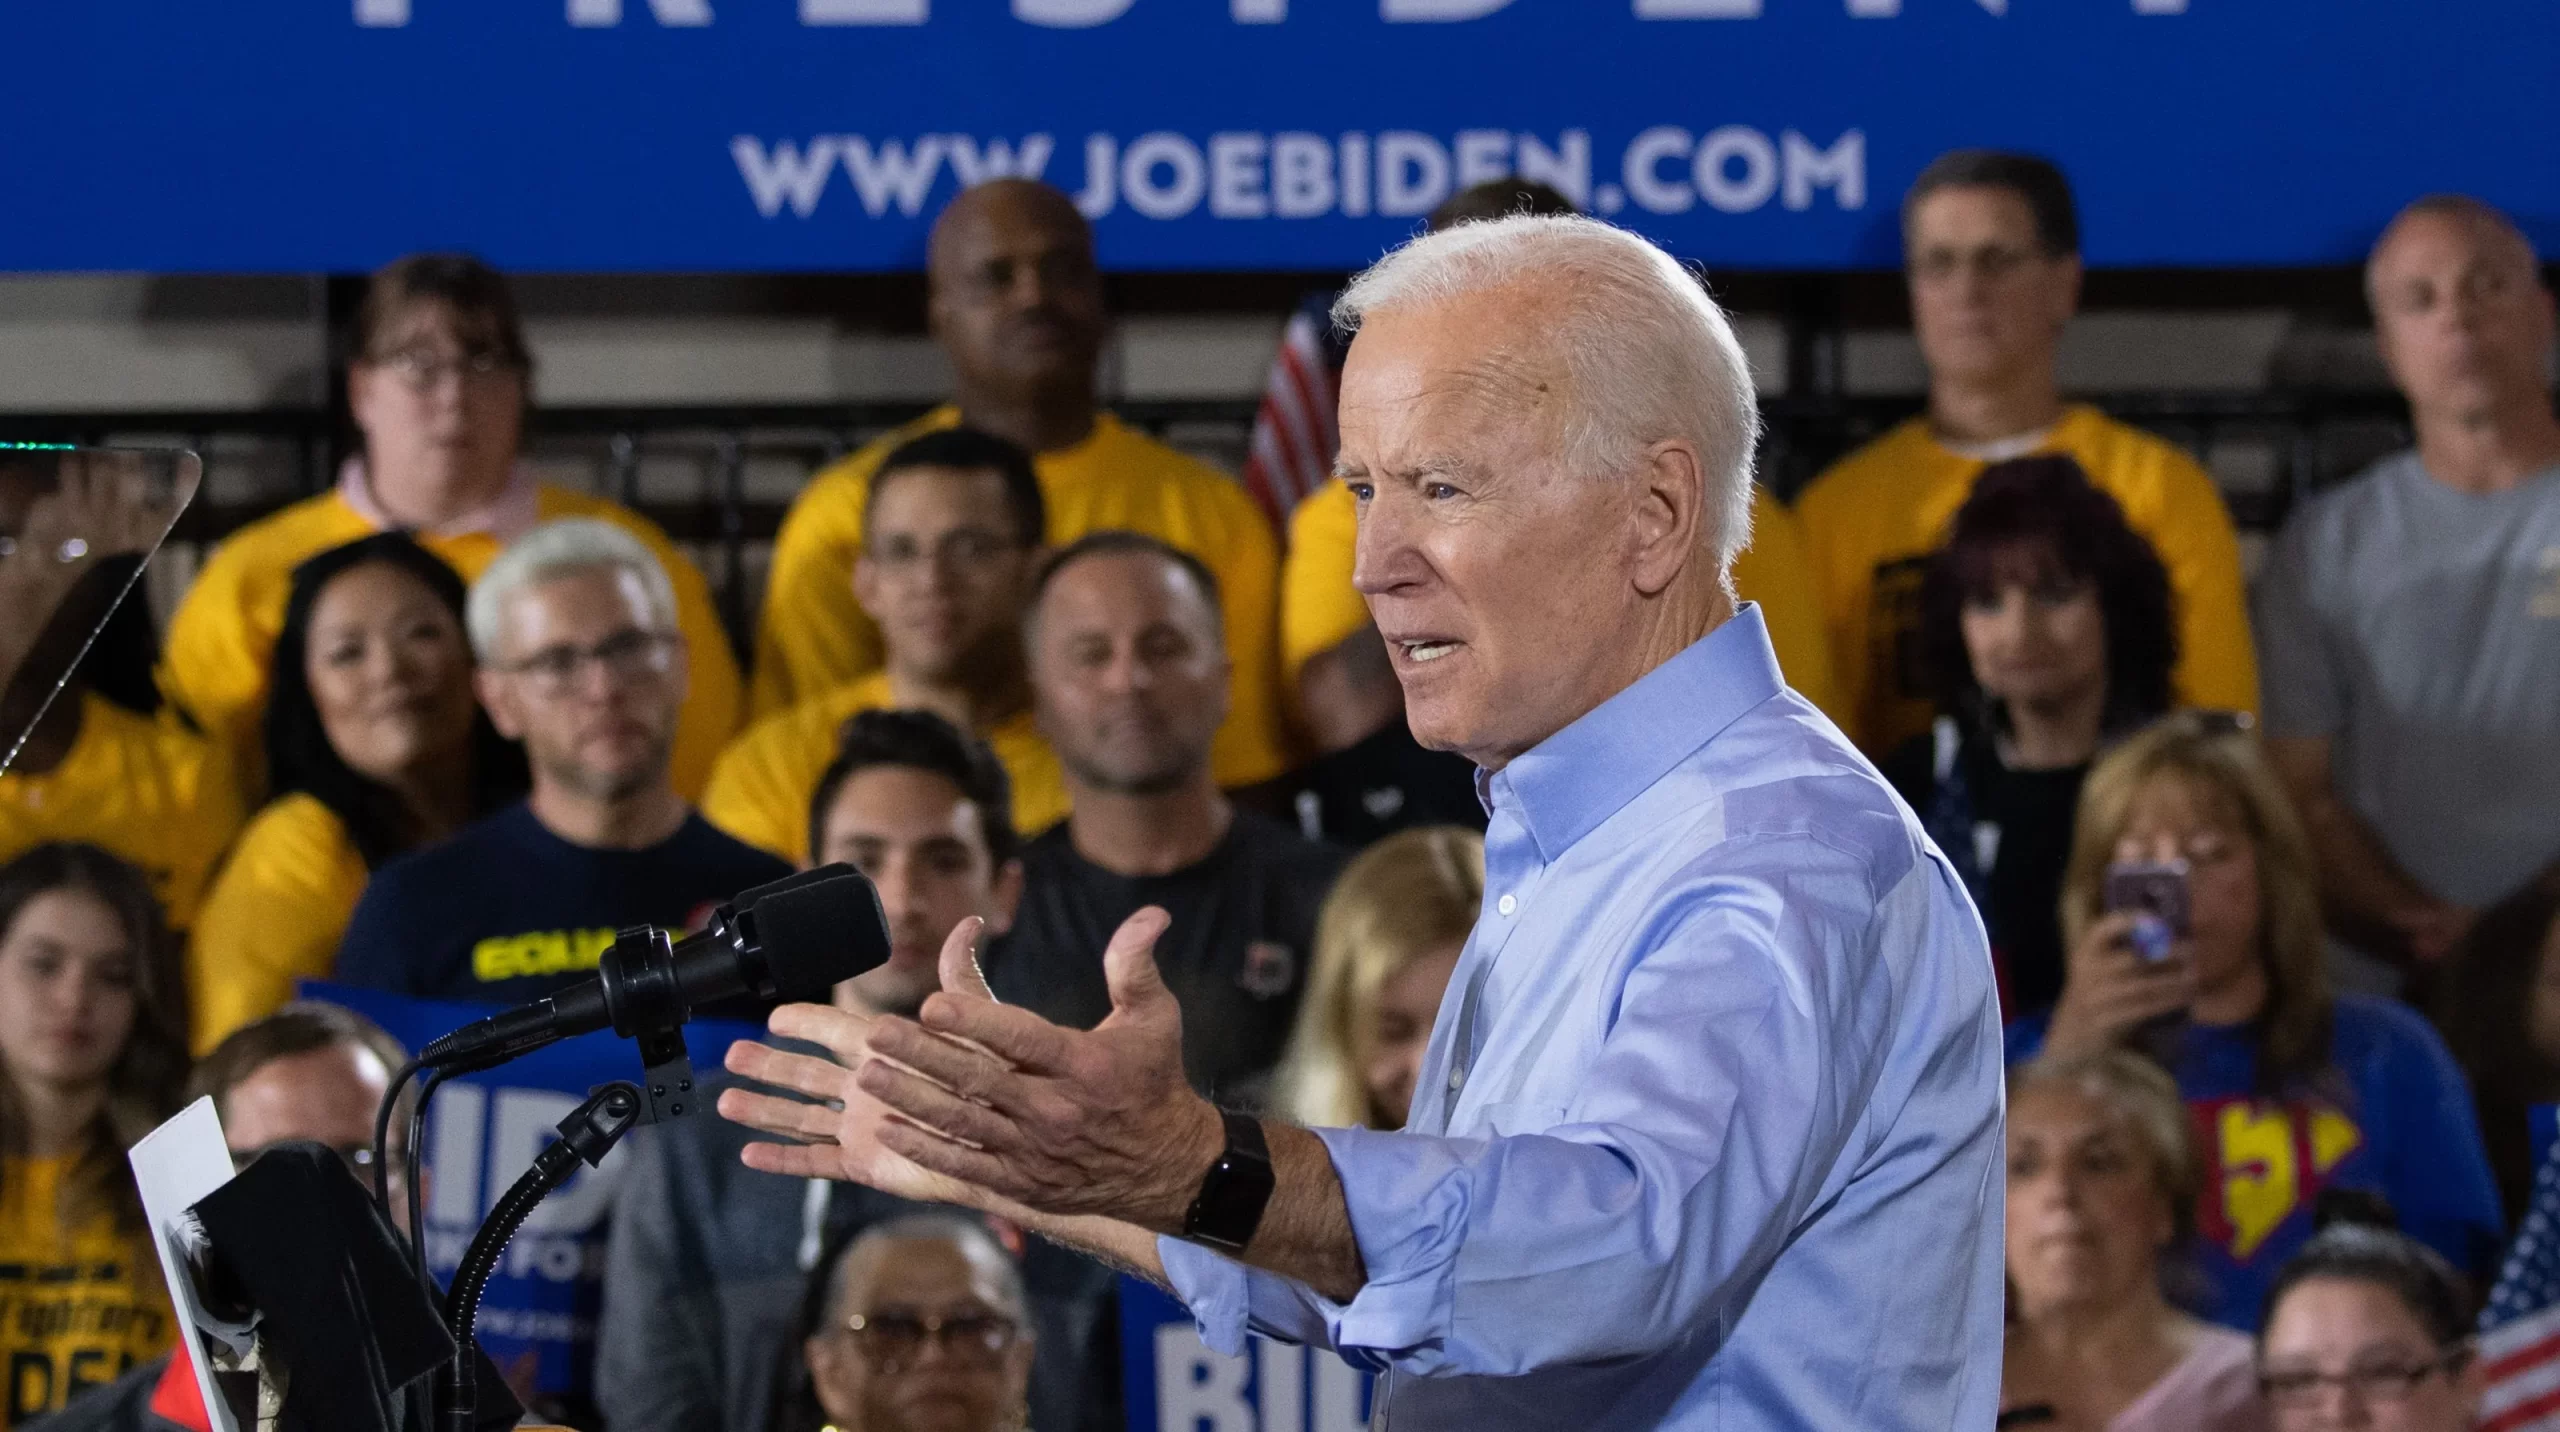 Pension cuts are ‘not going to happen’: Biden announces federal bailout for troubled union pension fund